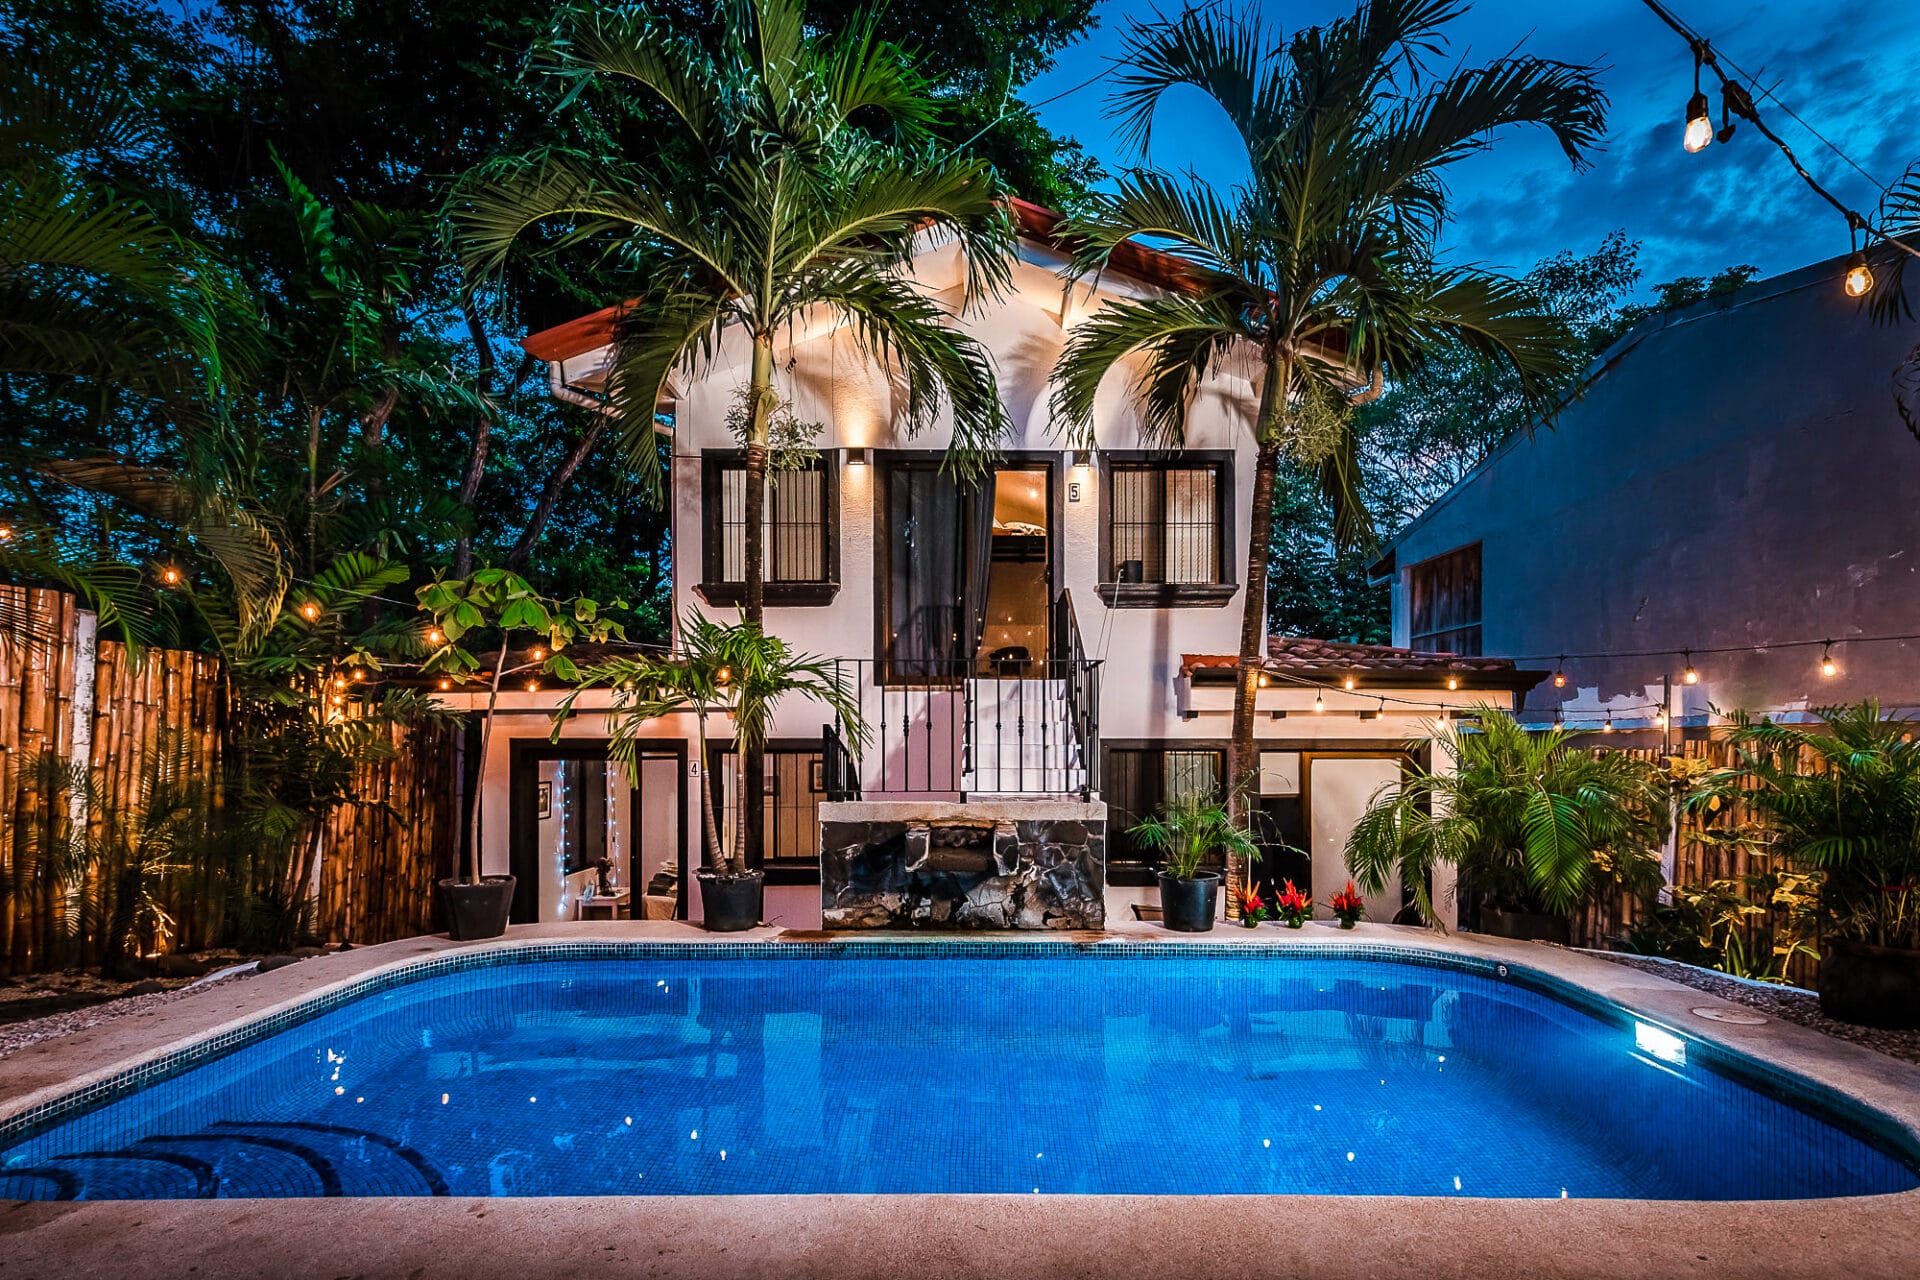 Quaint Boutique Hotel Located in the Heart of Tamarindo!